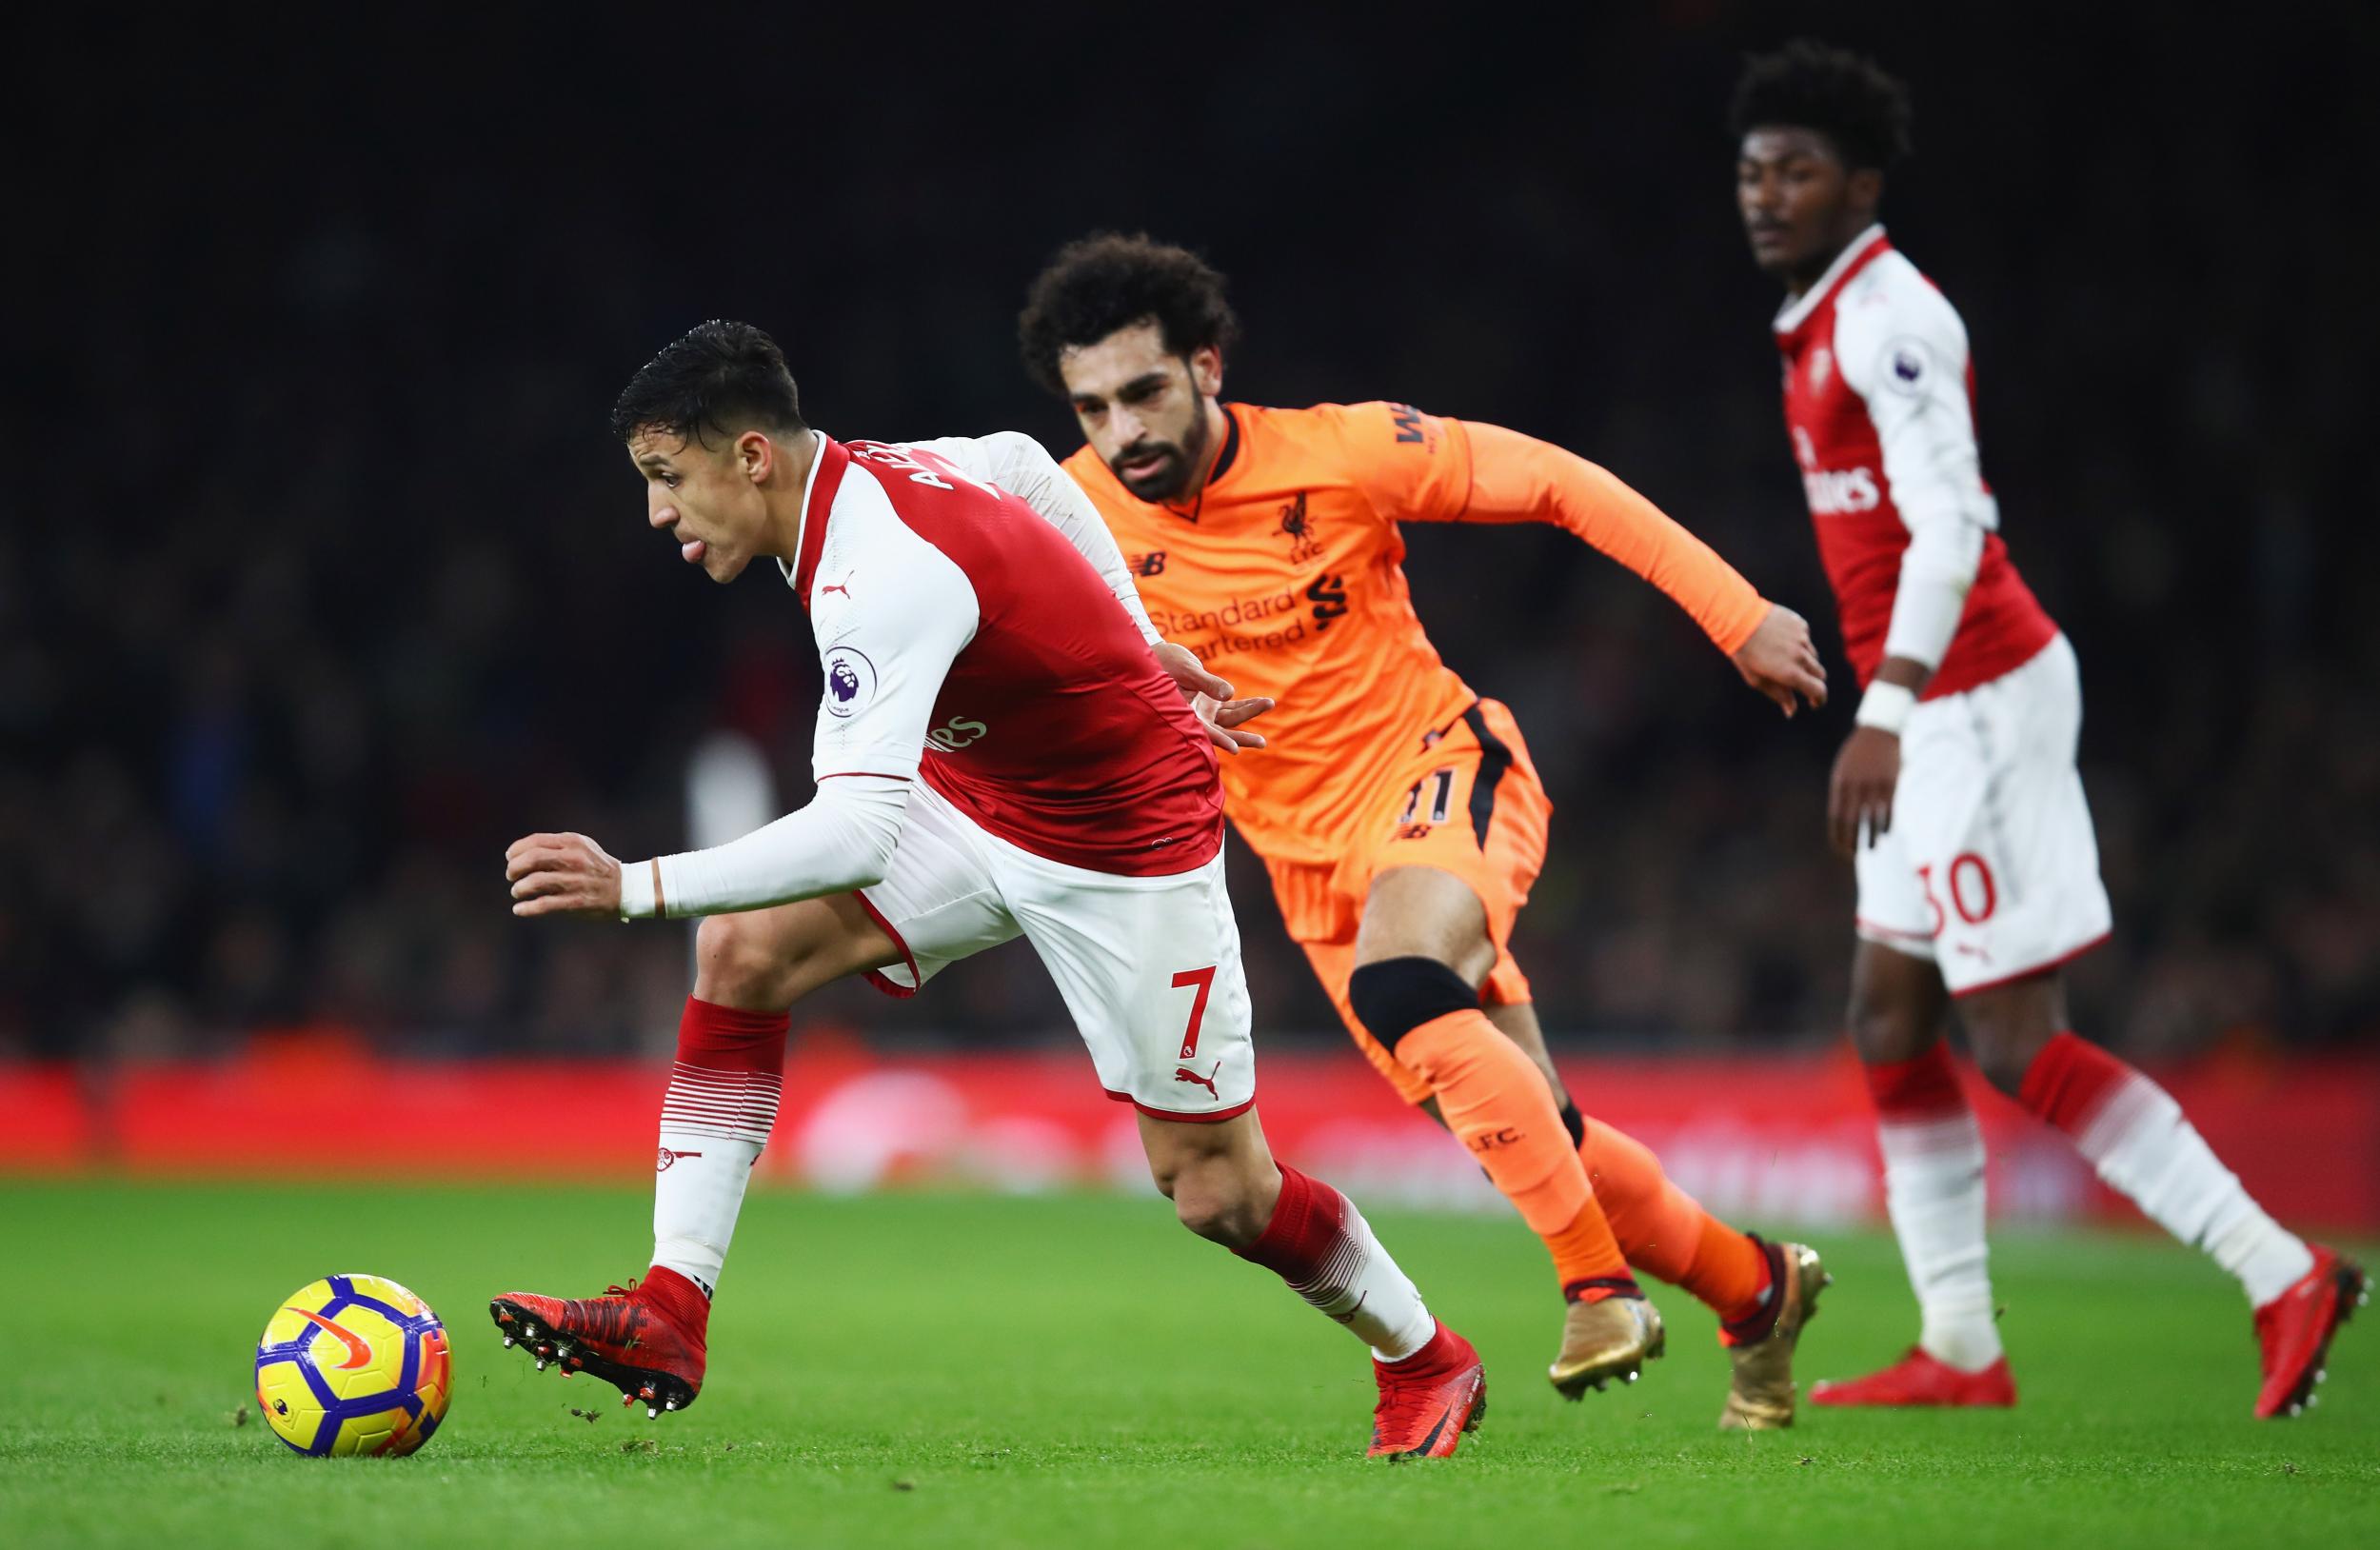 Arsenal vs Liverpool live: Premier League updates as Mesut Ozil puts Gunners in front!